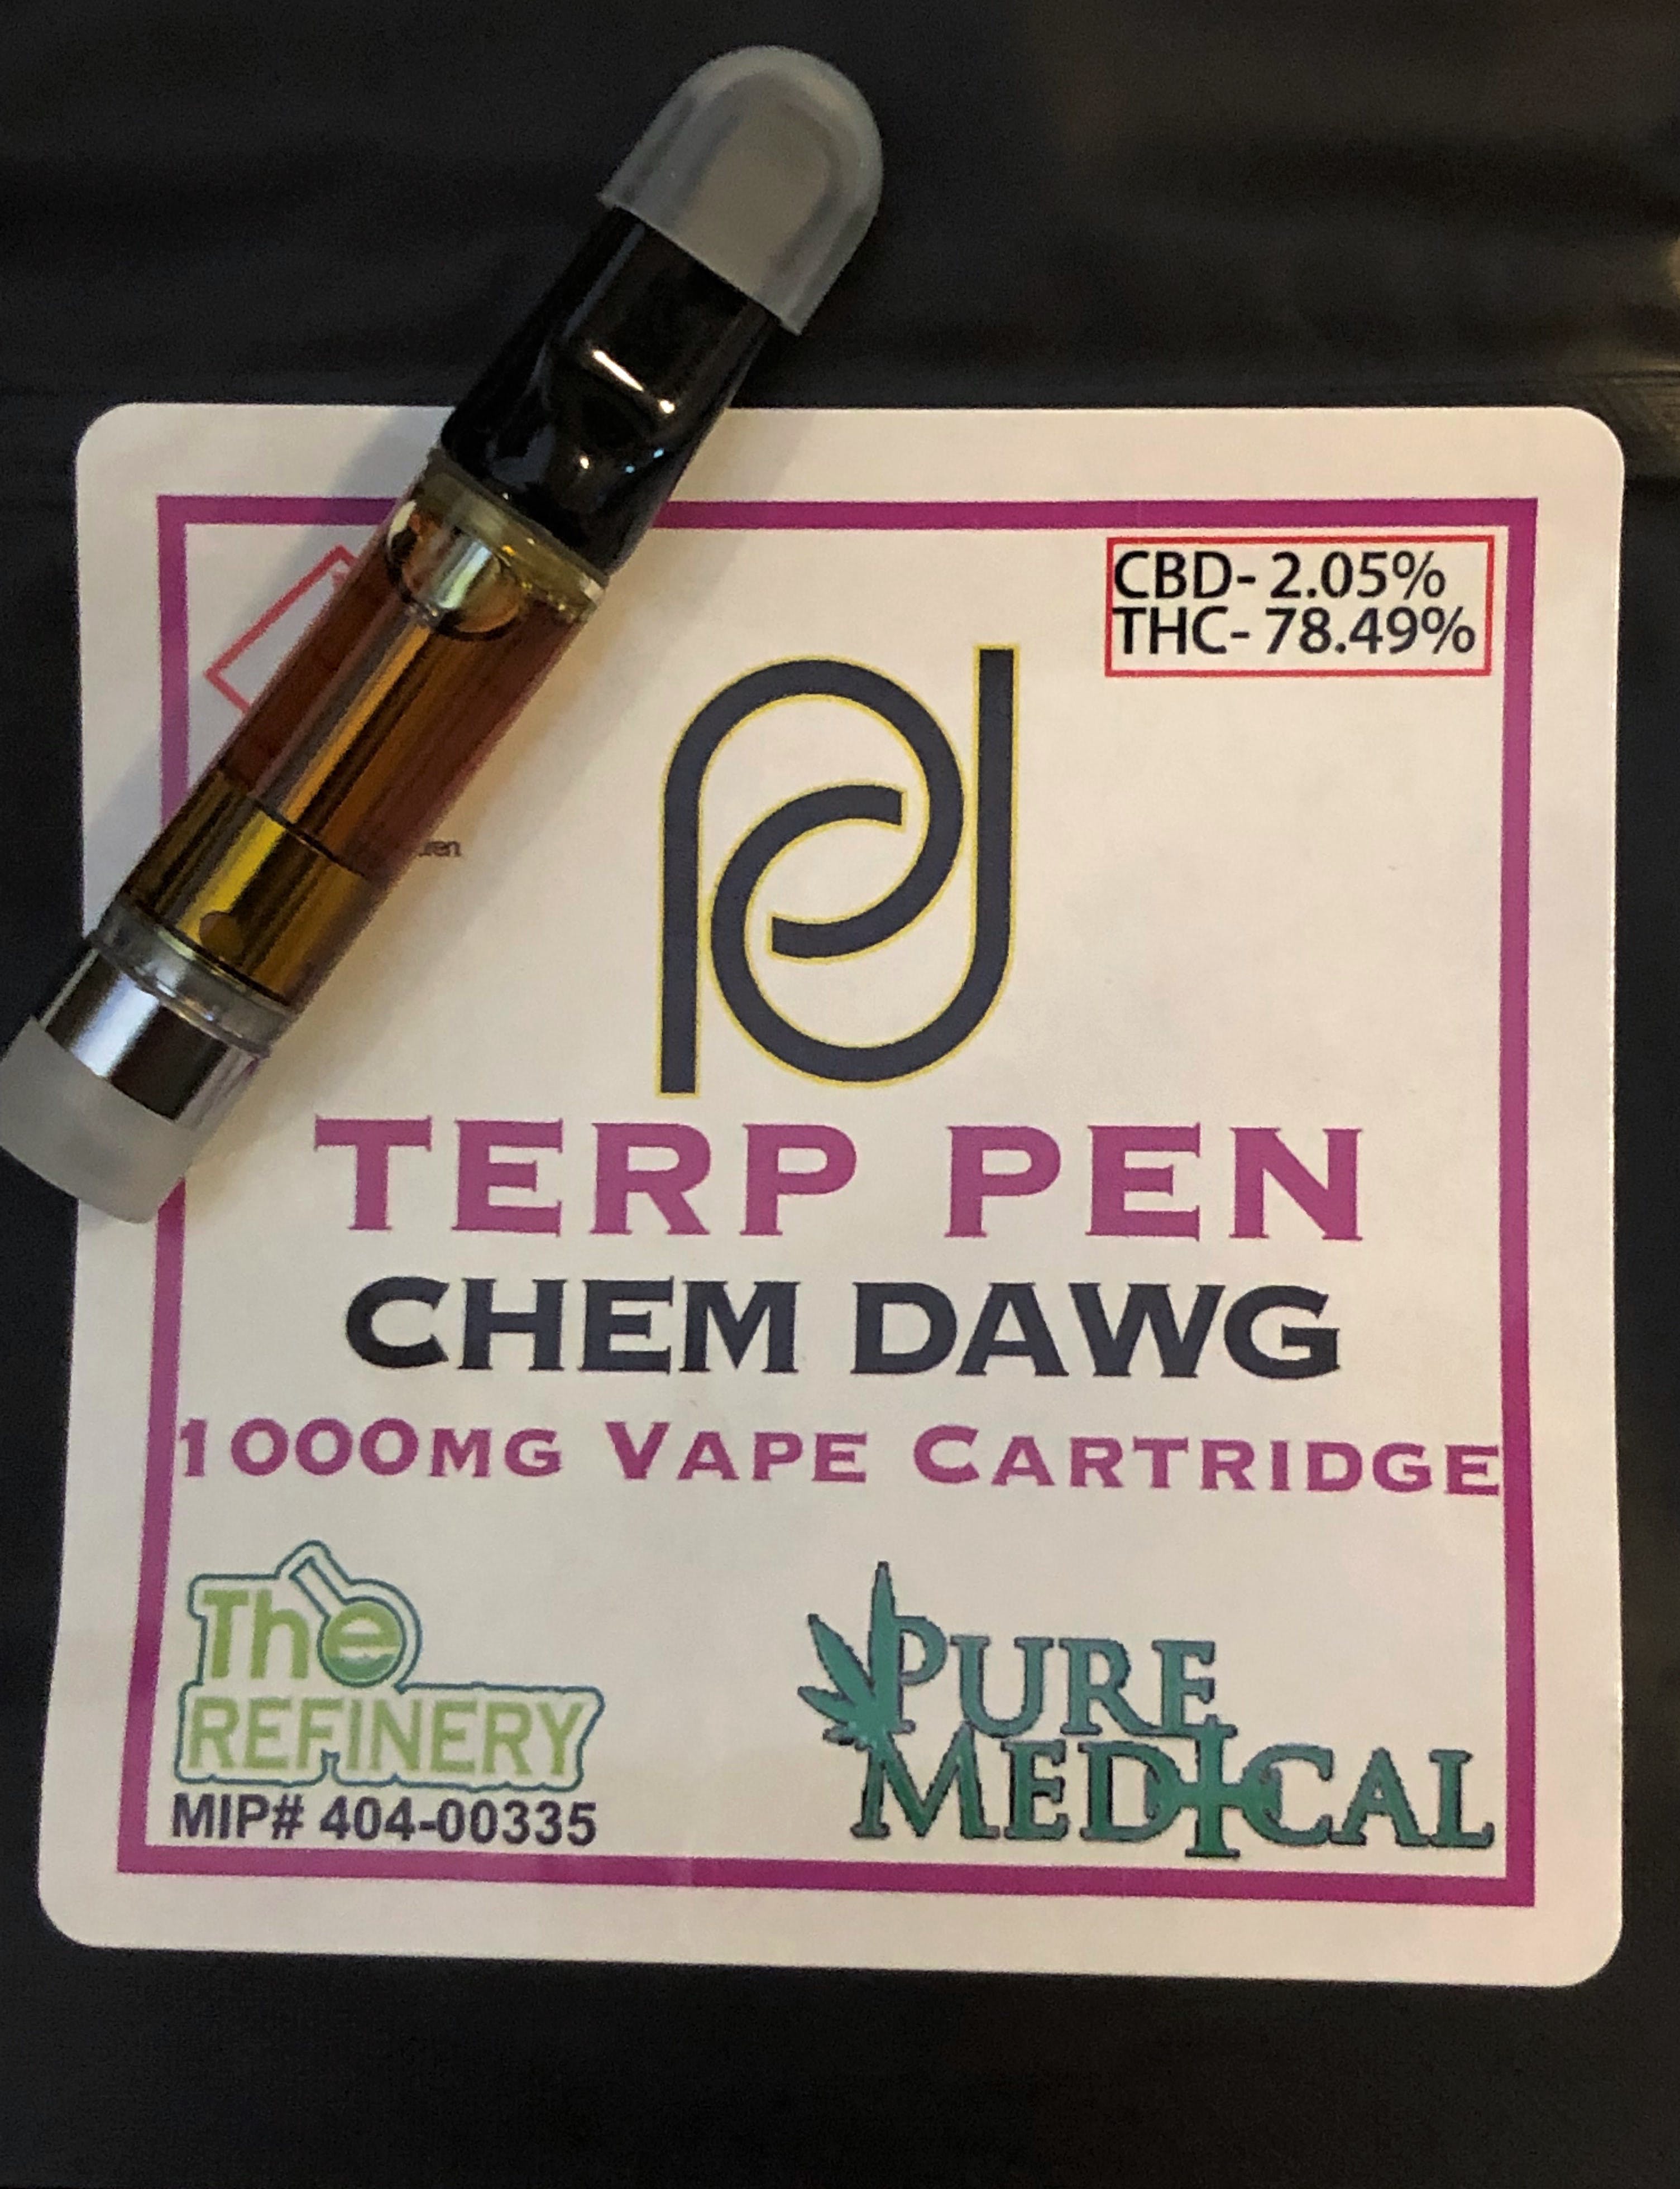 concentrate-chem-dawg-pure-distilled-1000mg-cartridge